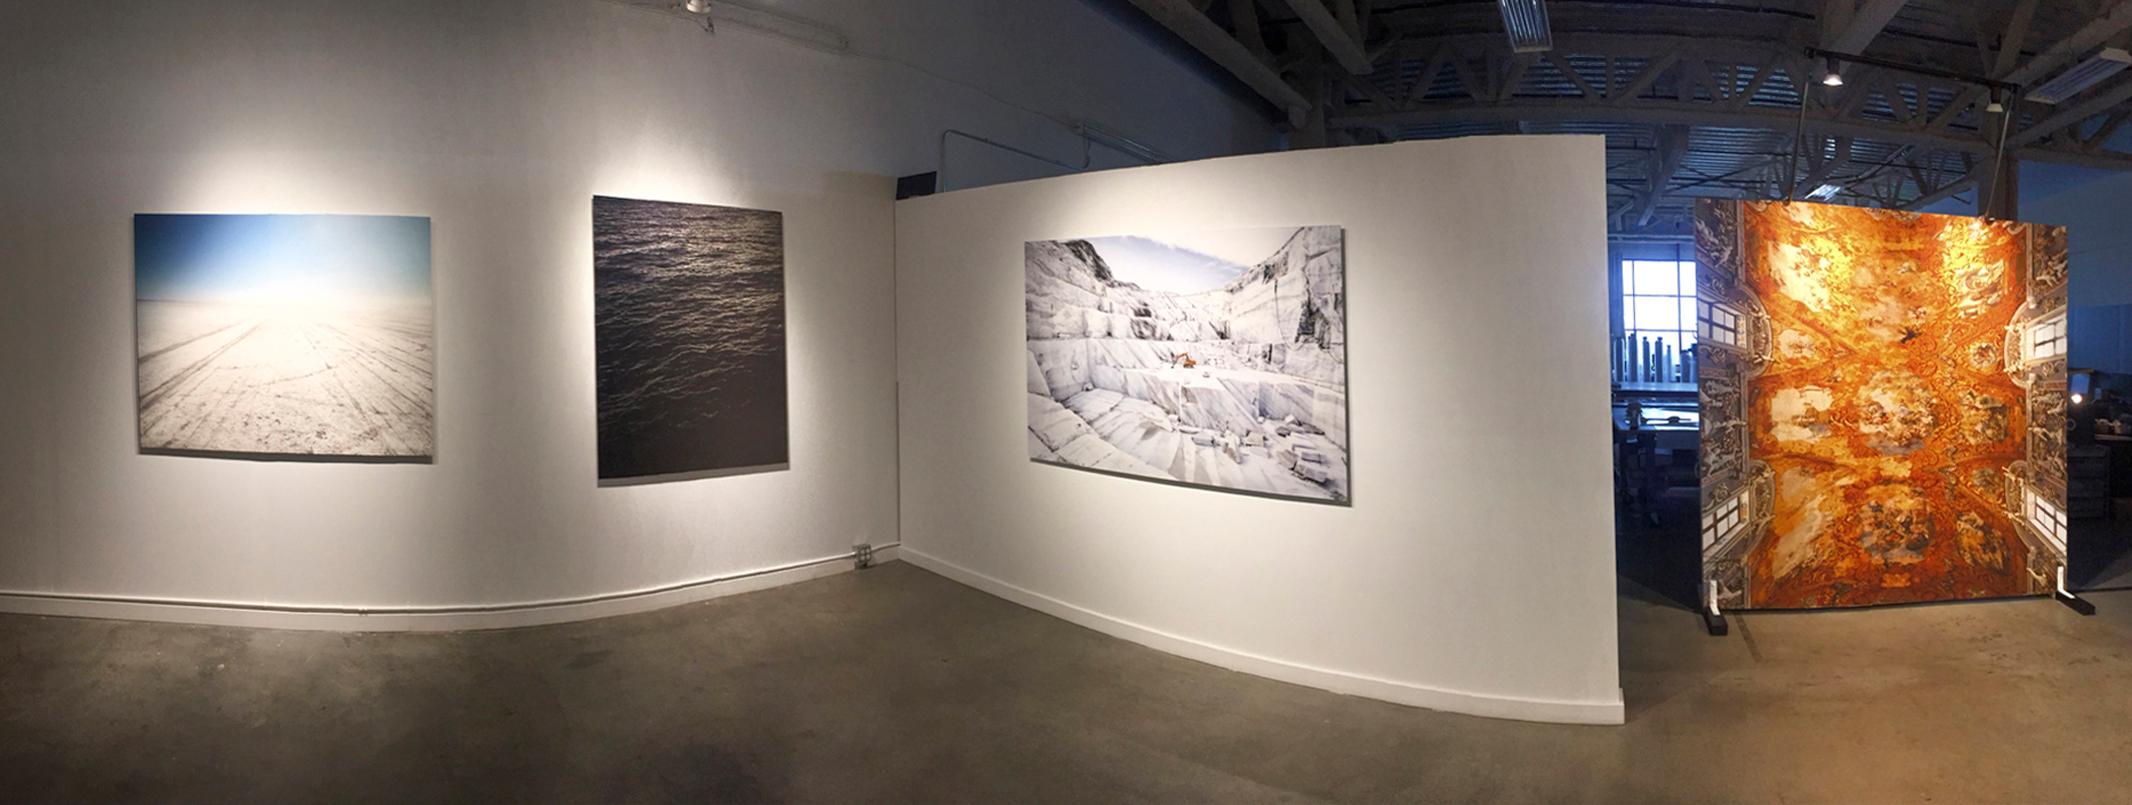 Marmo di Carrara - large format photograph of iconic Italian marble quarry - Gray Landscape Photograph by Frank Schott